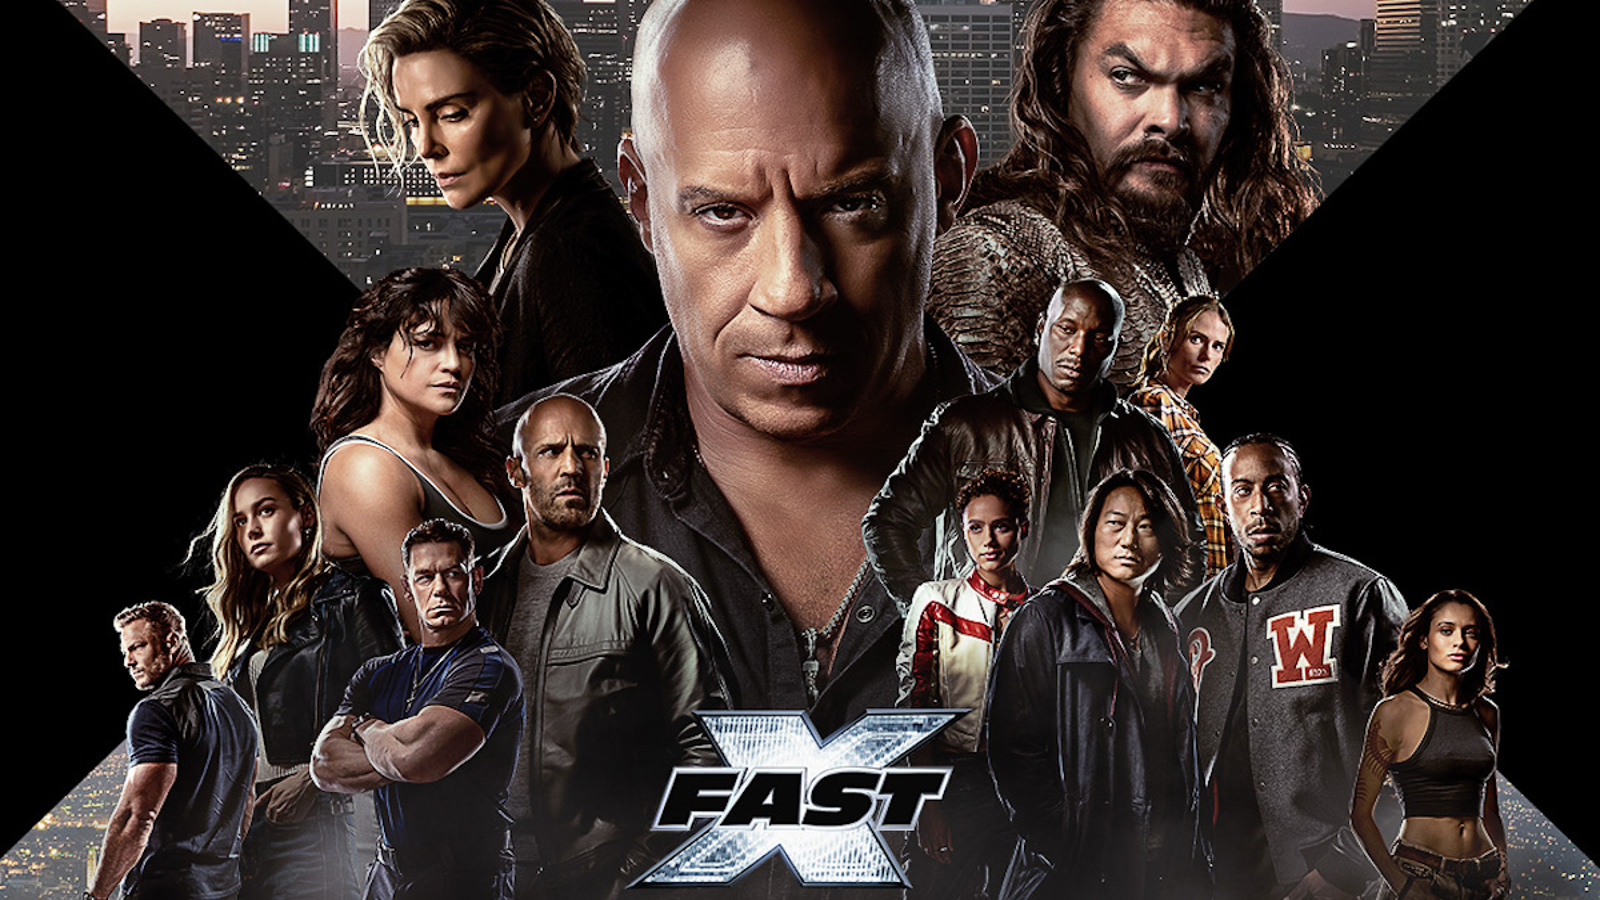 Fast X is a BAD movie 